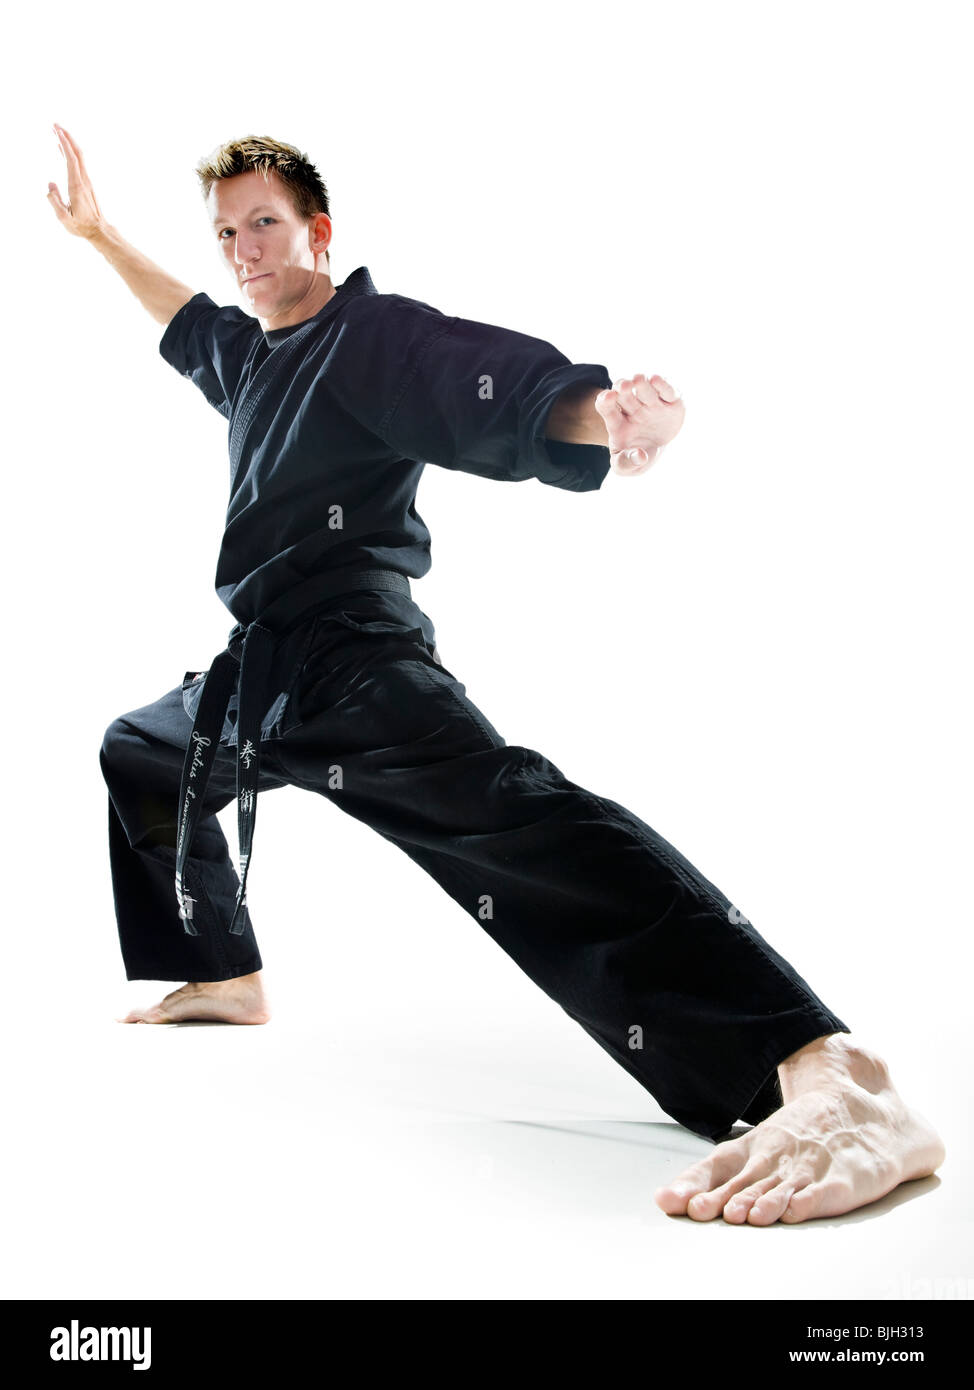 man in a black karate gi practicing martial arts Stock Photo